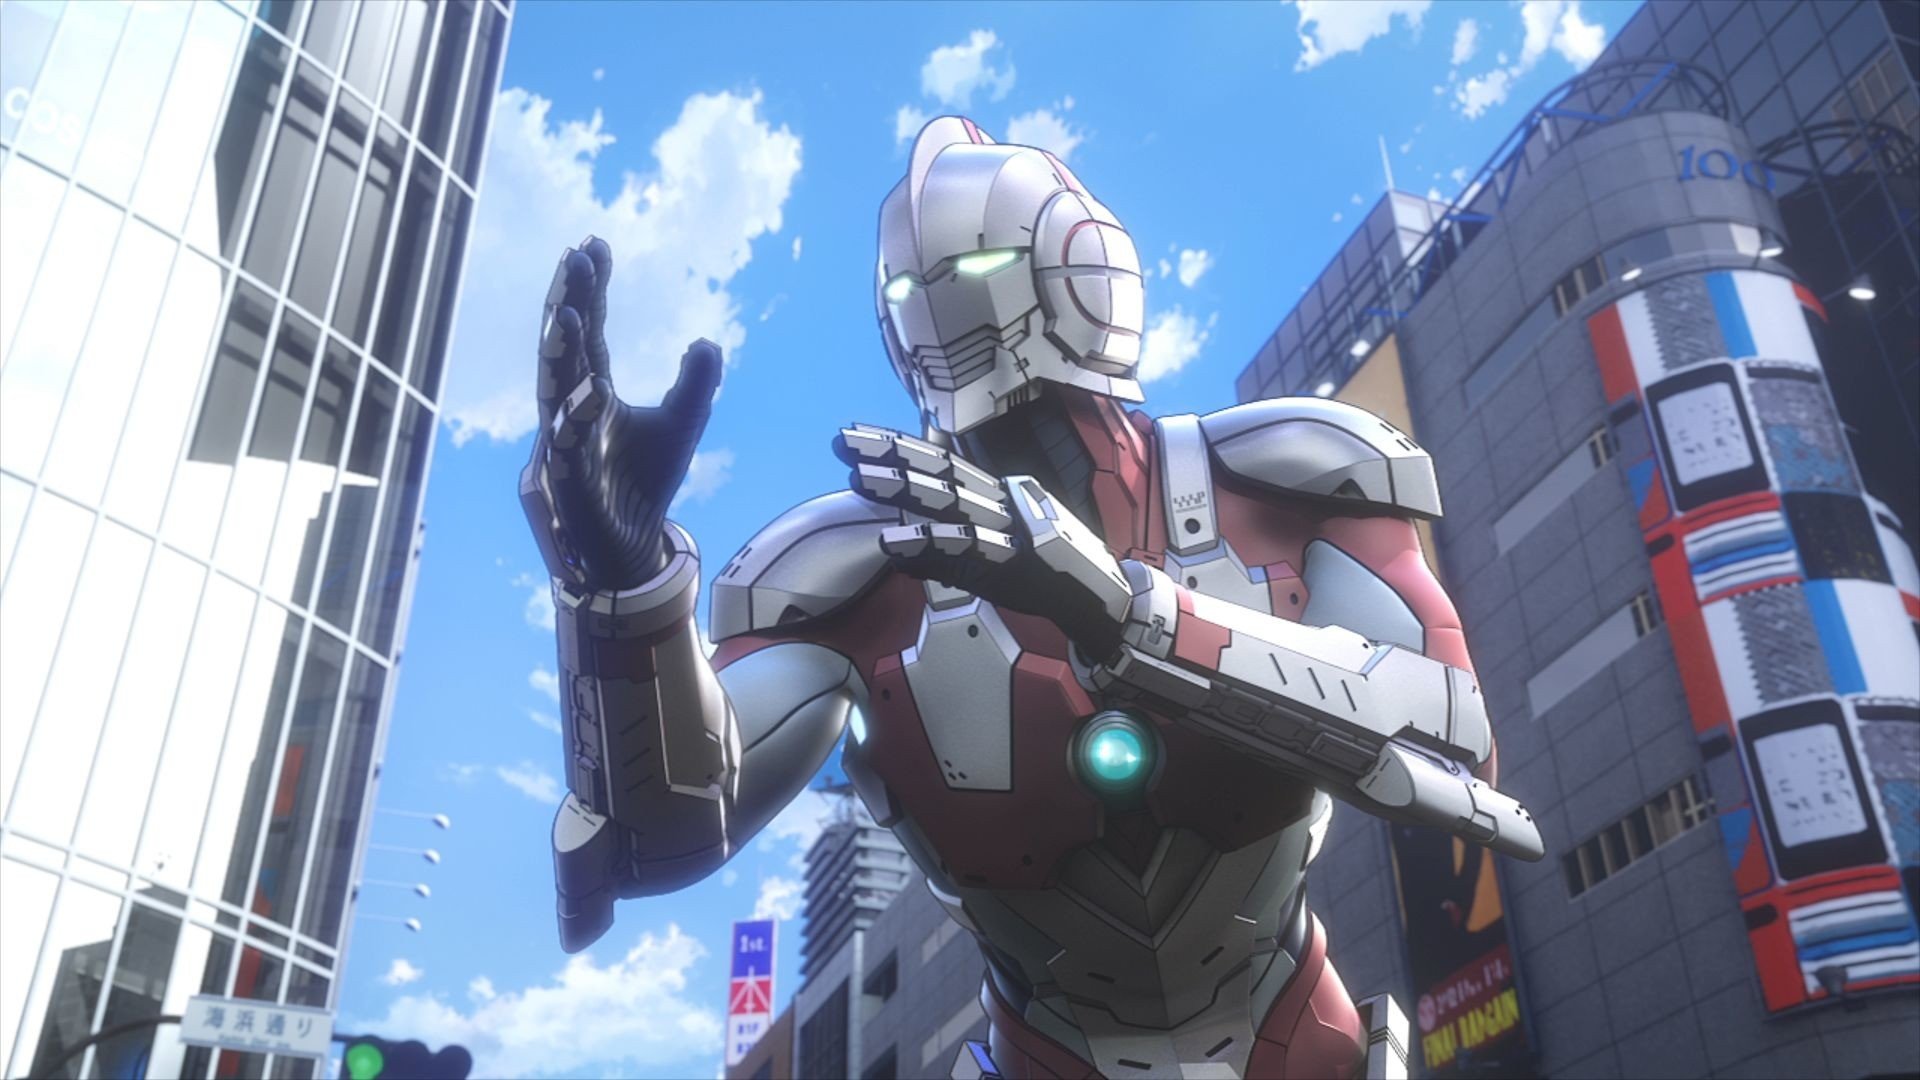 Iconic Japanese sci-fi series Ultraman is being rebooted for Netflix, where it will join a host of existing anime content that could help the streaming giant fend off its competitors in Asia.